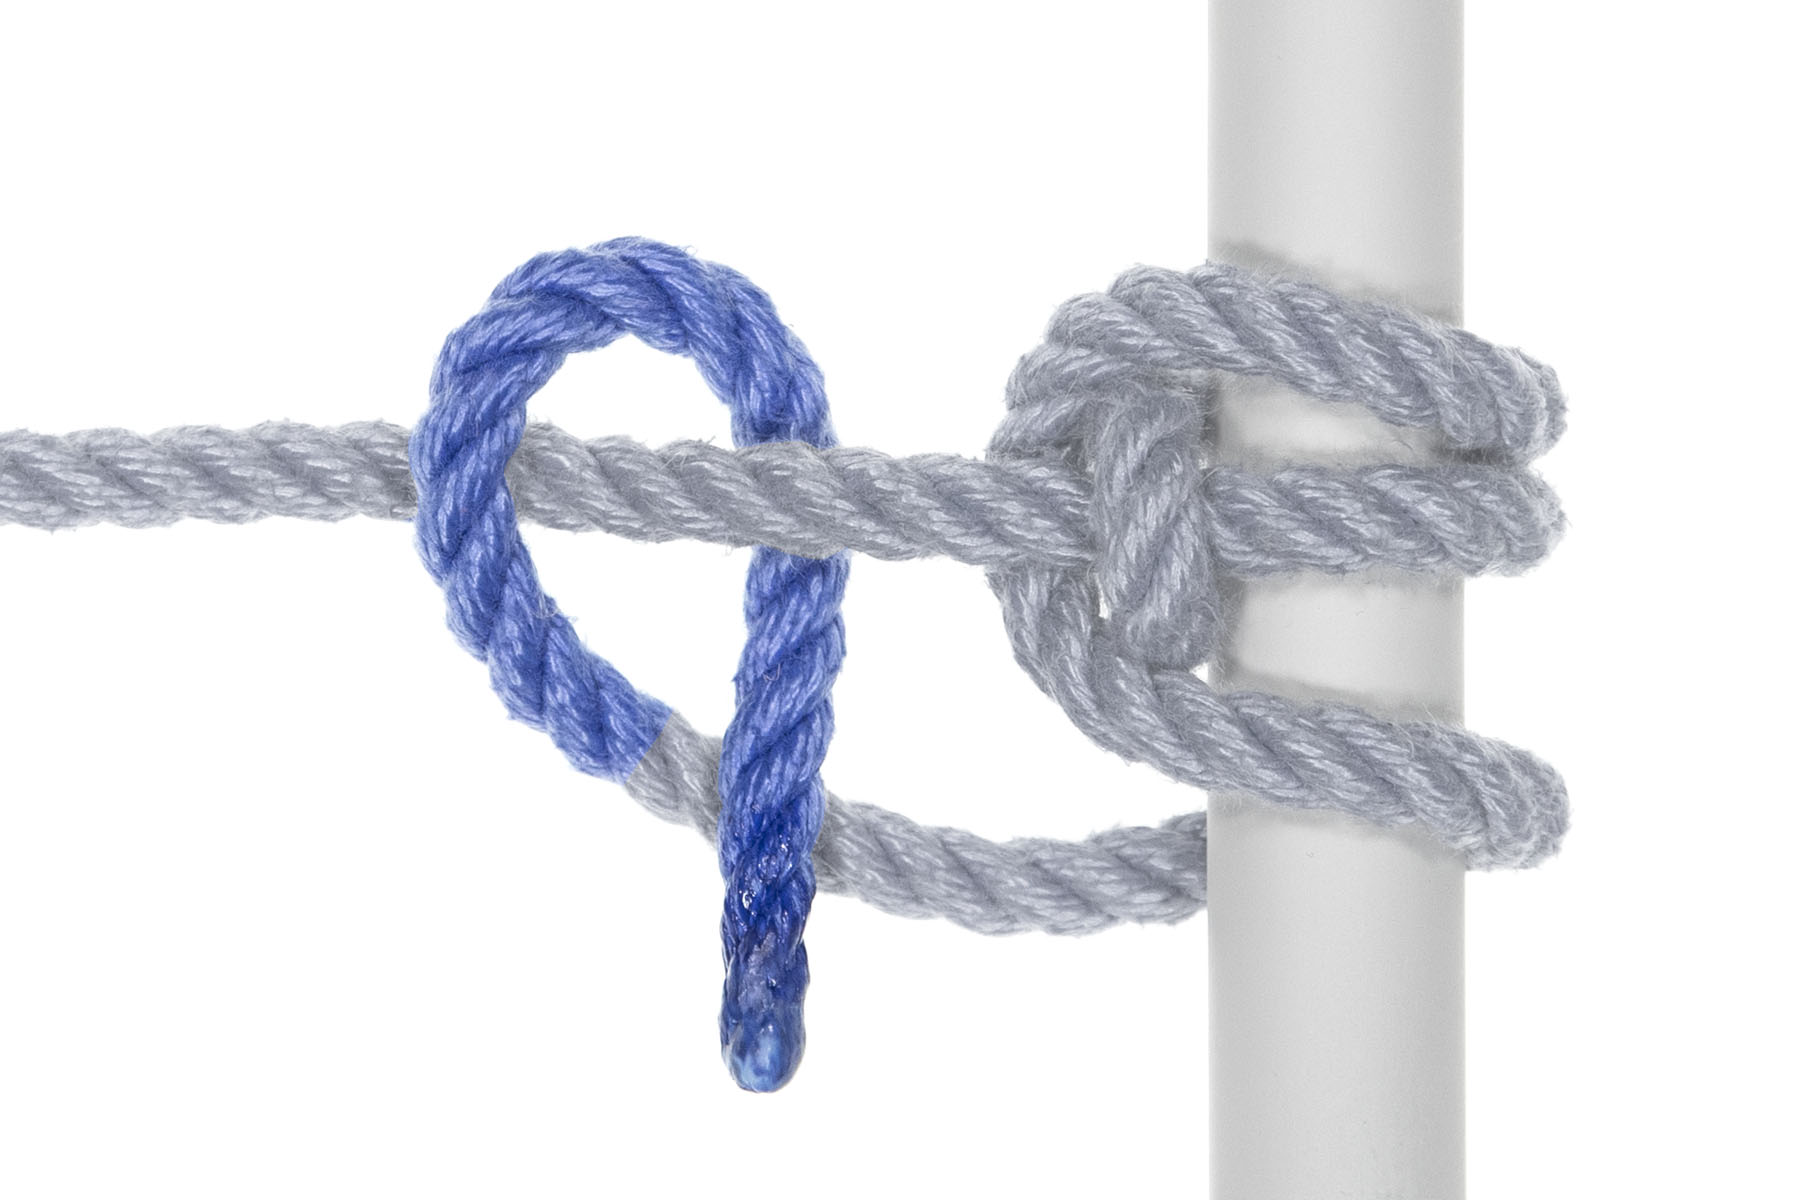 The working end makes a half hitch around the standing part by going over the standing part, under the standing part, and over itself.